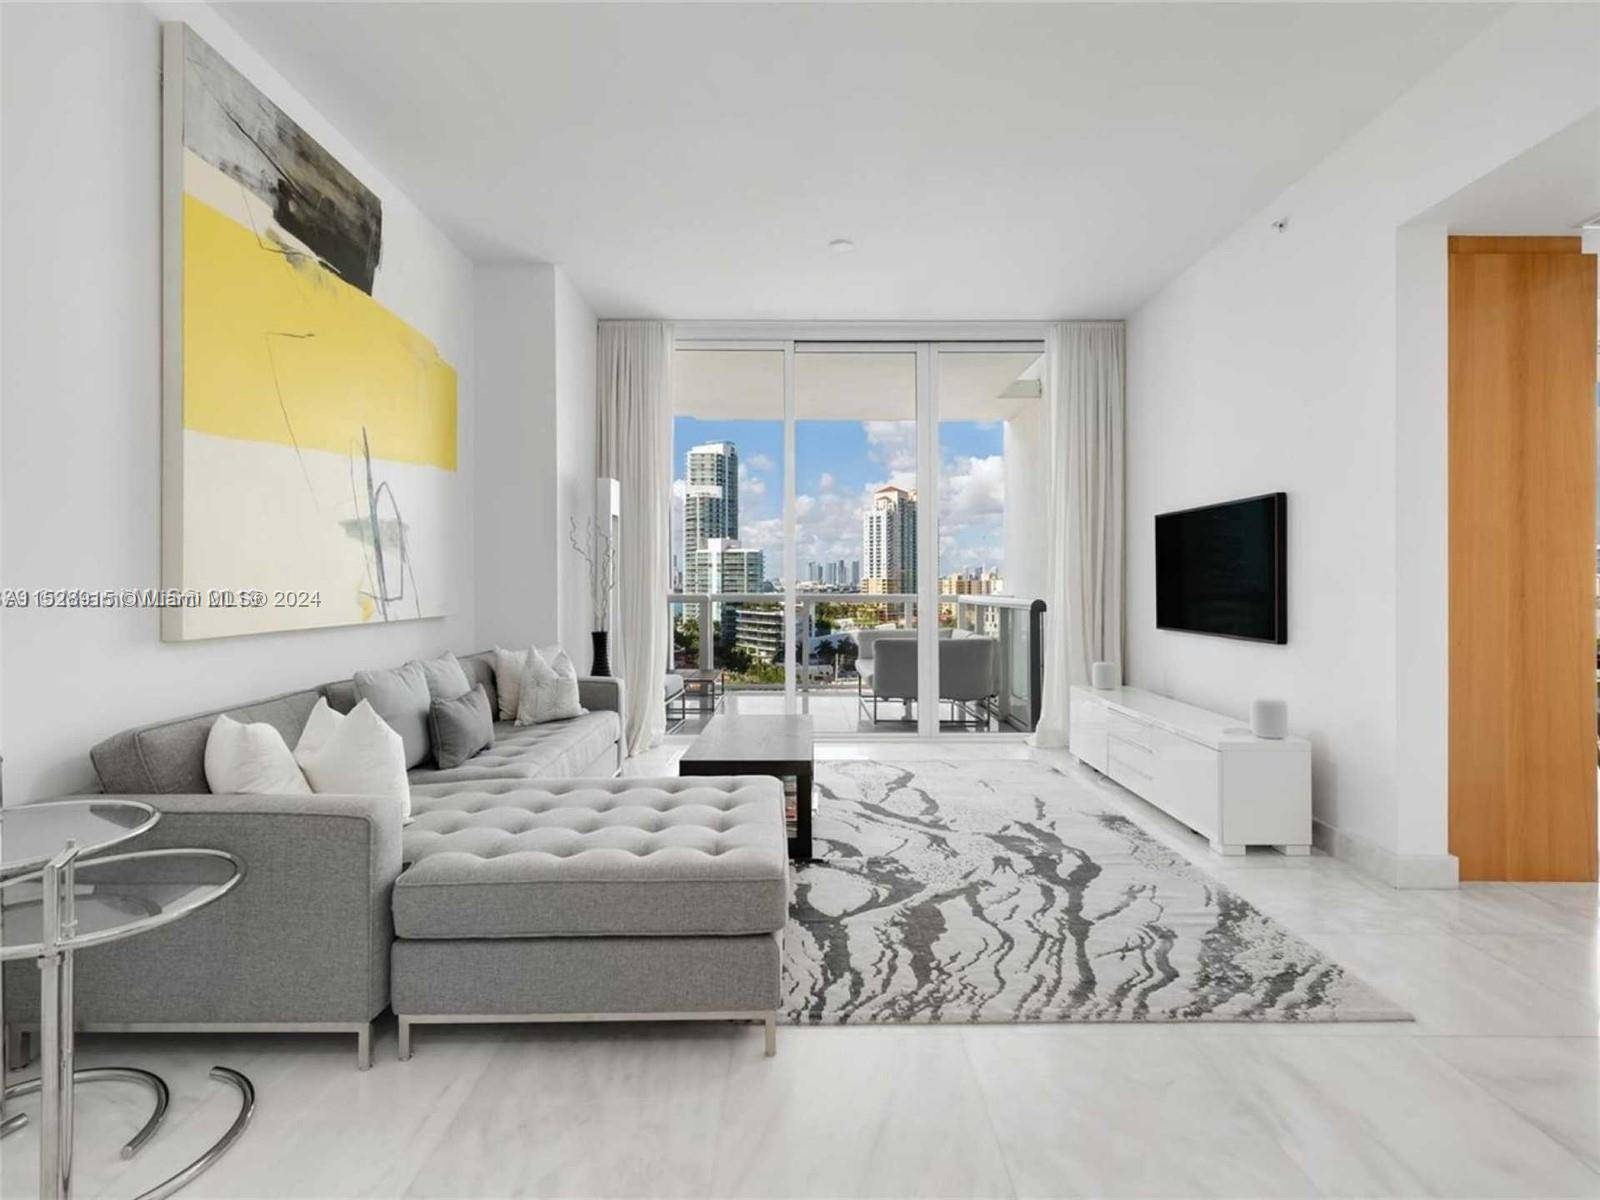 Stunning fully furnished two bedroom, two and a half bathroom corner unit at the Continuum in South Beach.